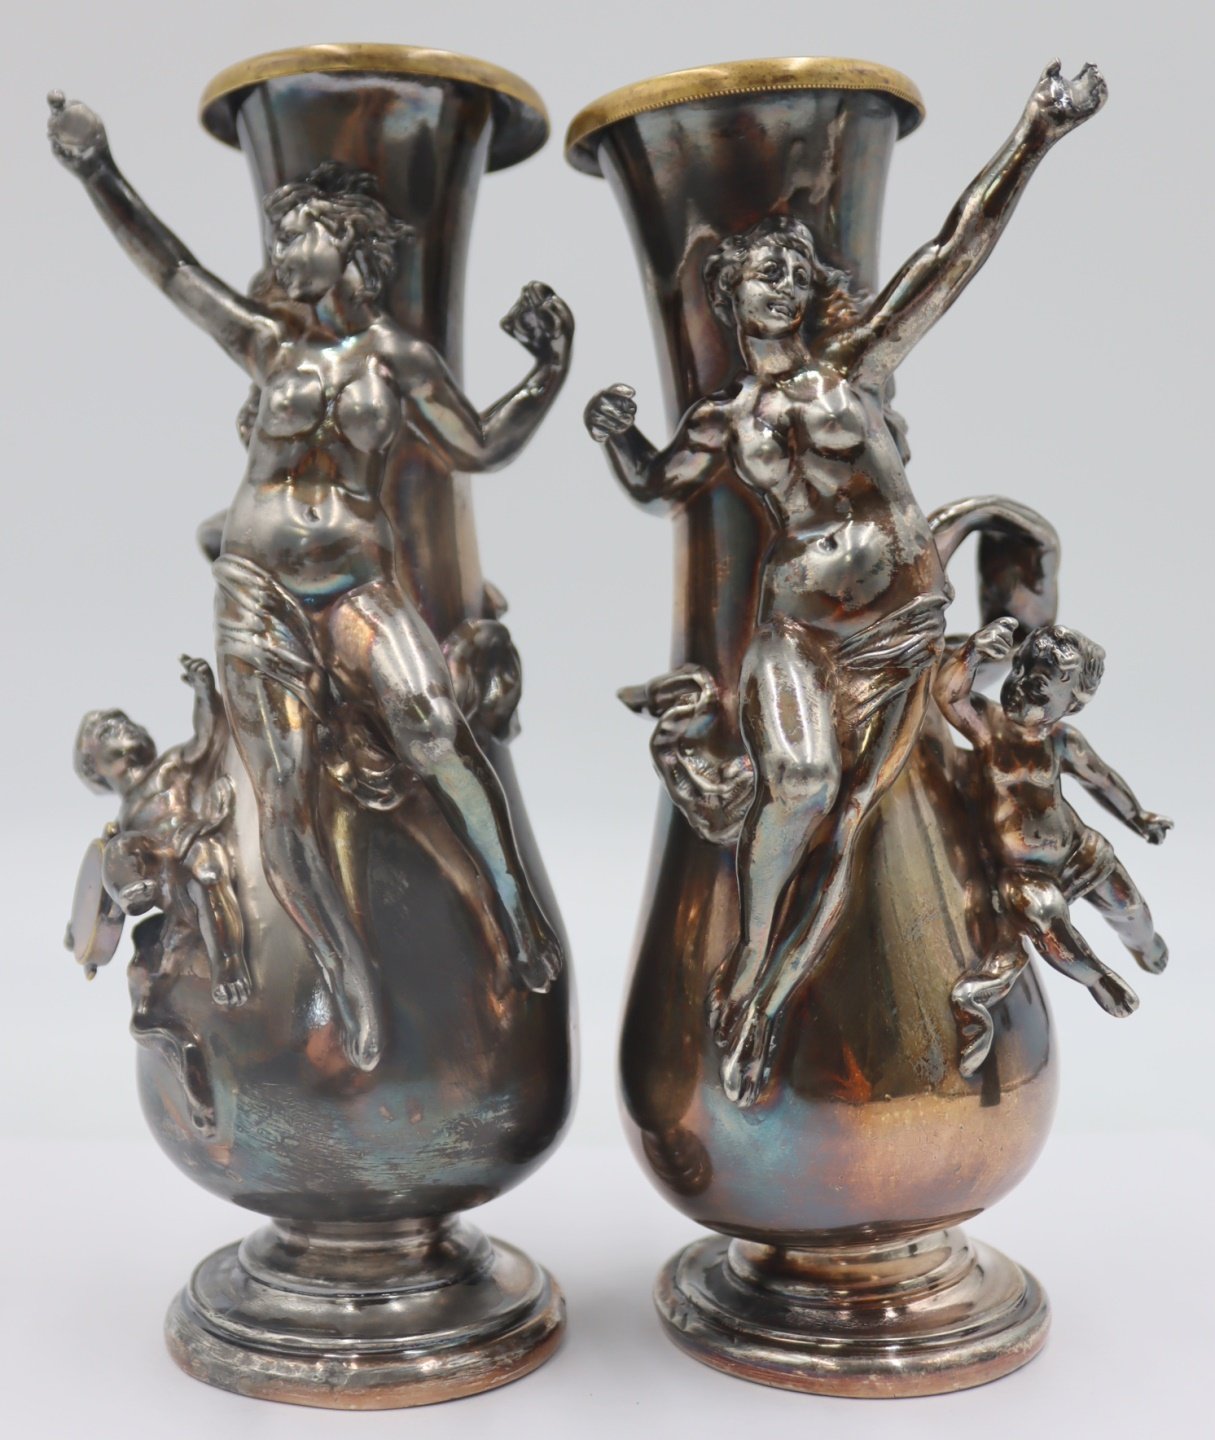 SILVERPLATE PAIR OF SILVERPLATE 3b389a